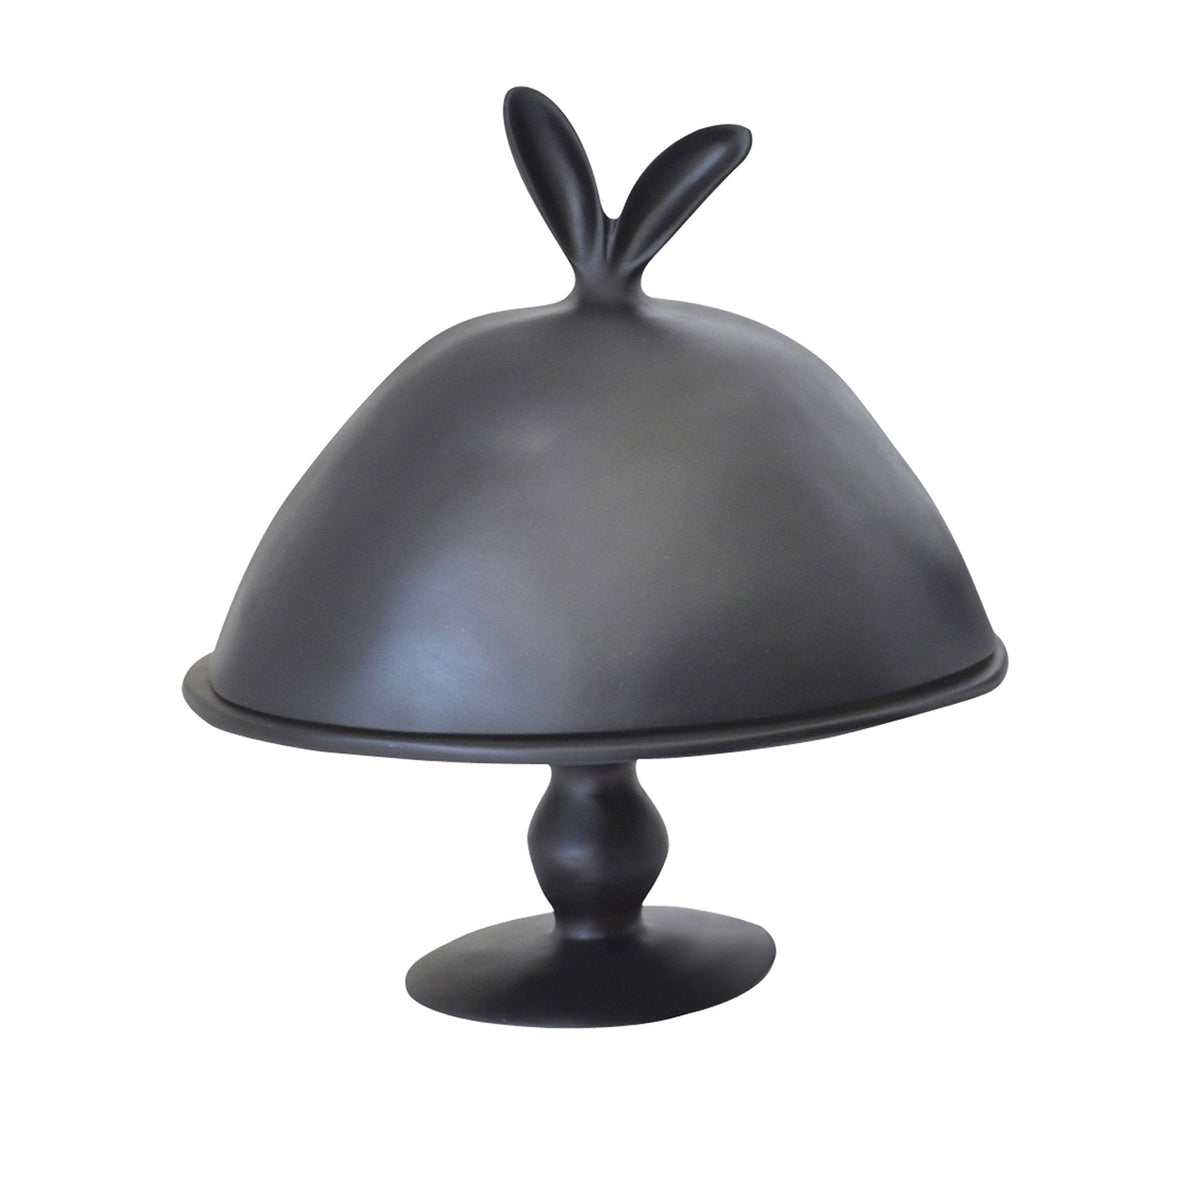 Bunny Ear Dome on Pedestal Stand, Large